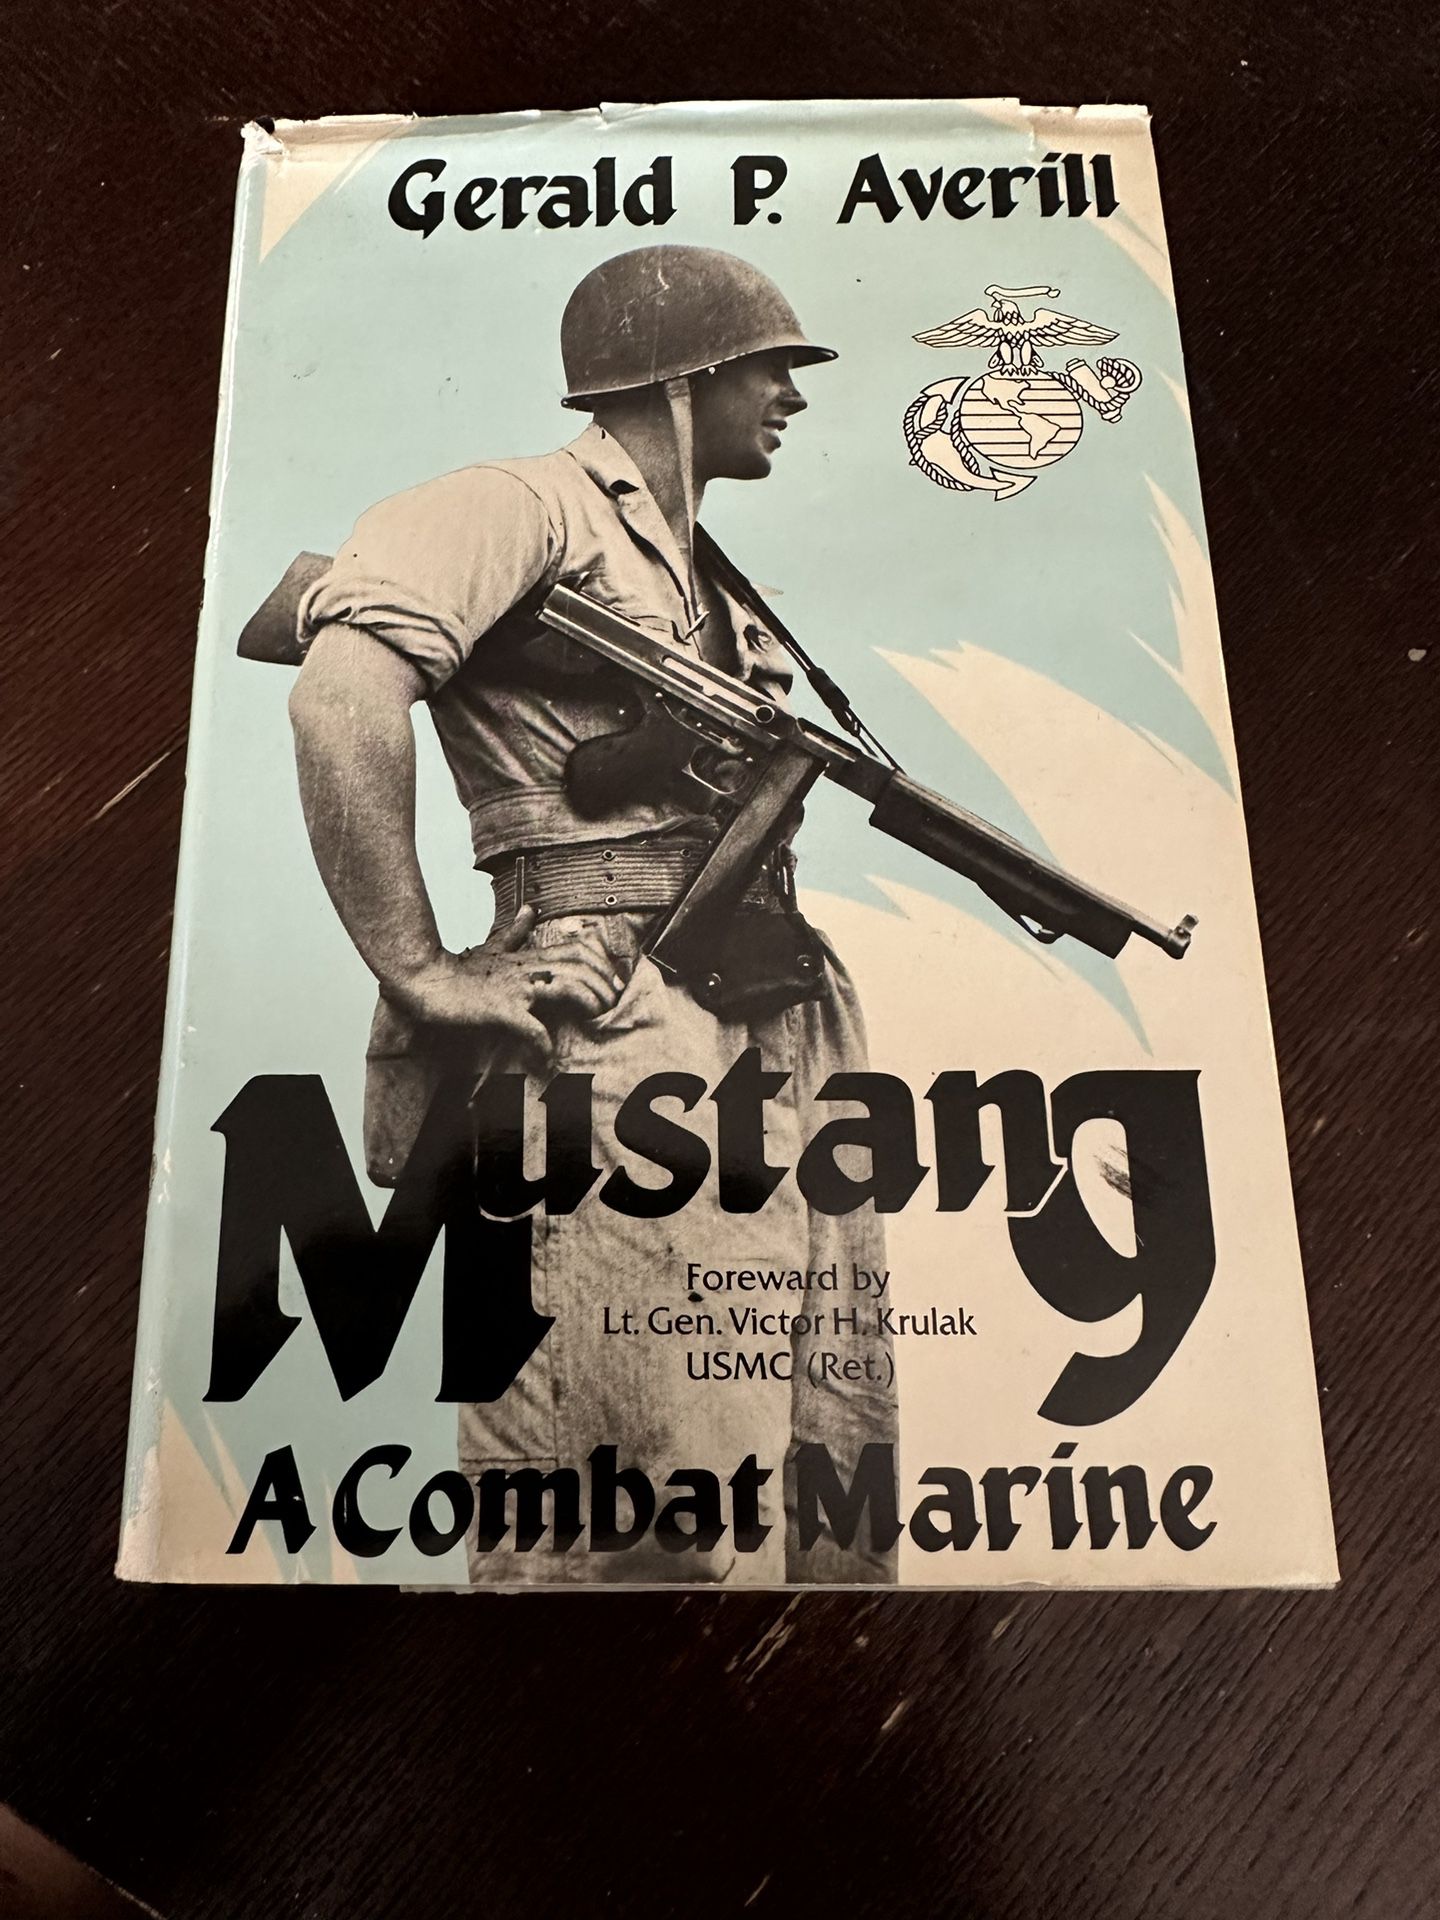 MUSTANG: A COMBAT MARINE by Gerald P. Averill